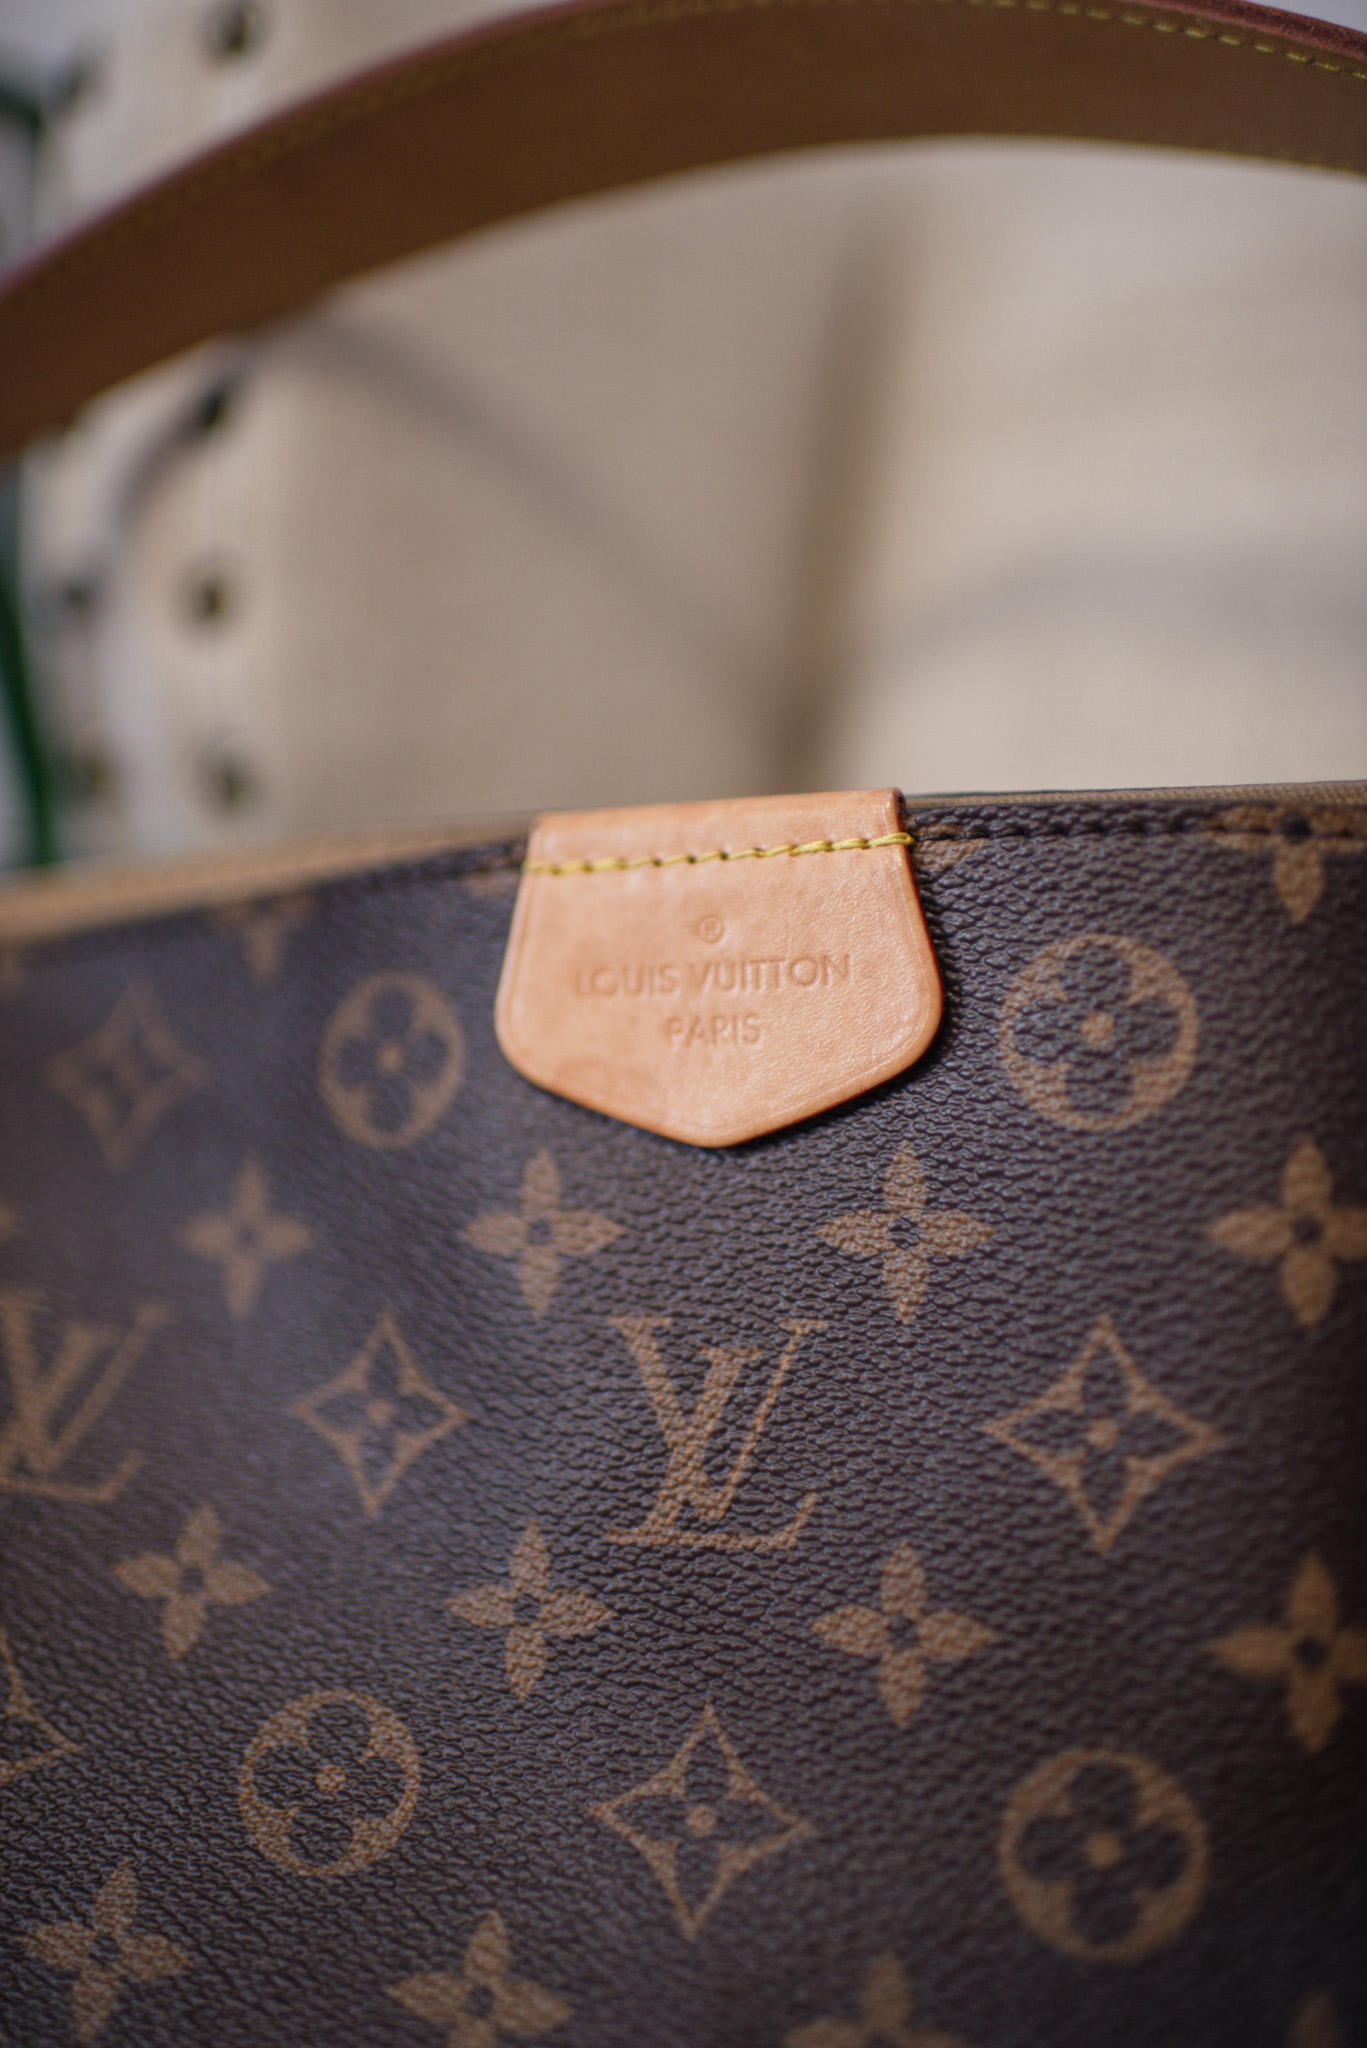 JennyKrafts - Reviews from customer: I ordered the #LV Graceful MM